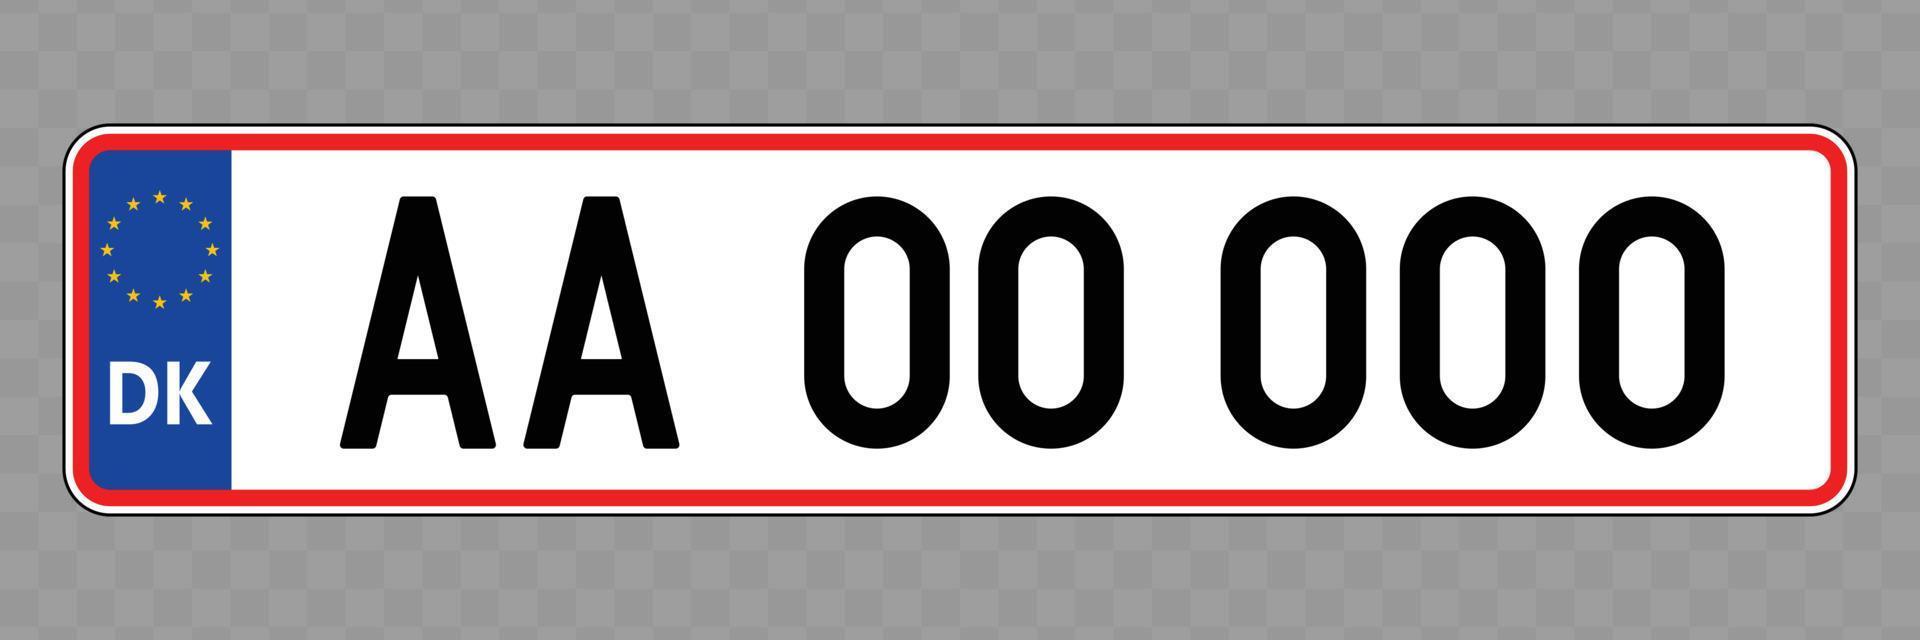 Vehicle number plate vector